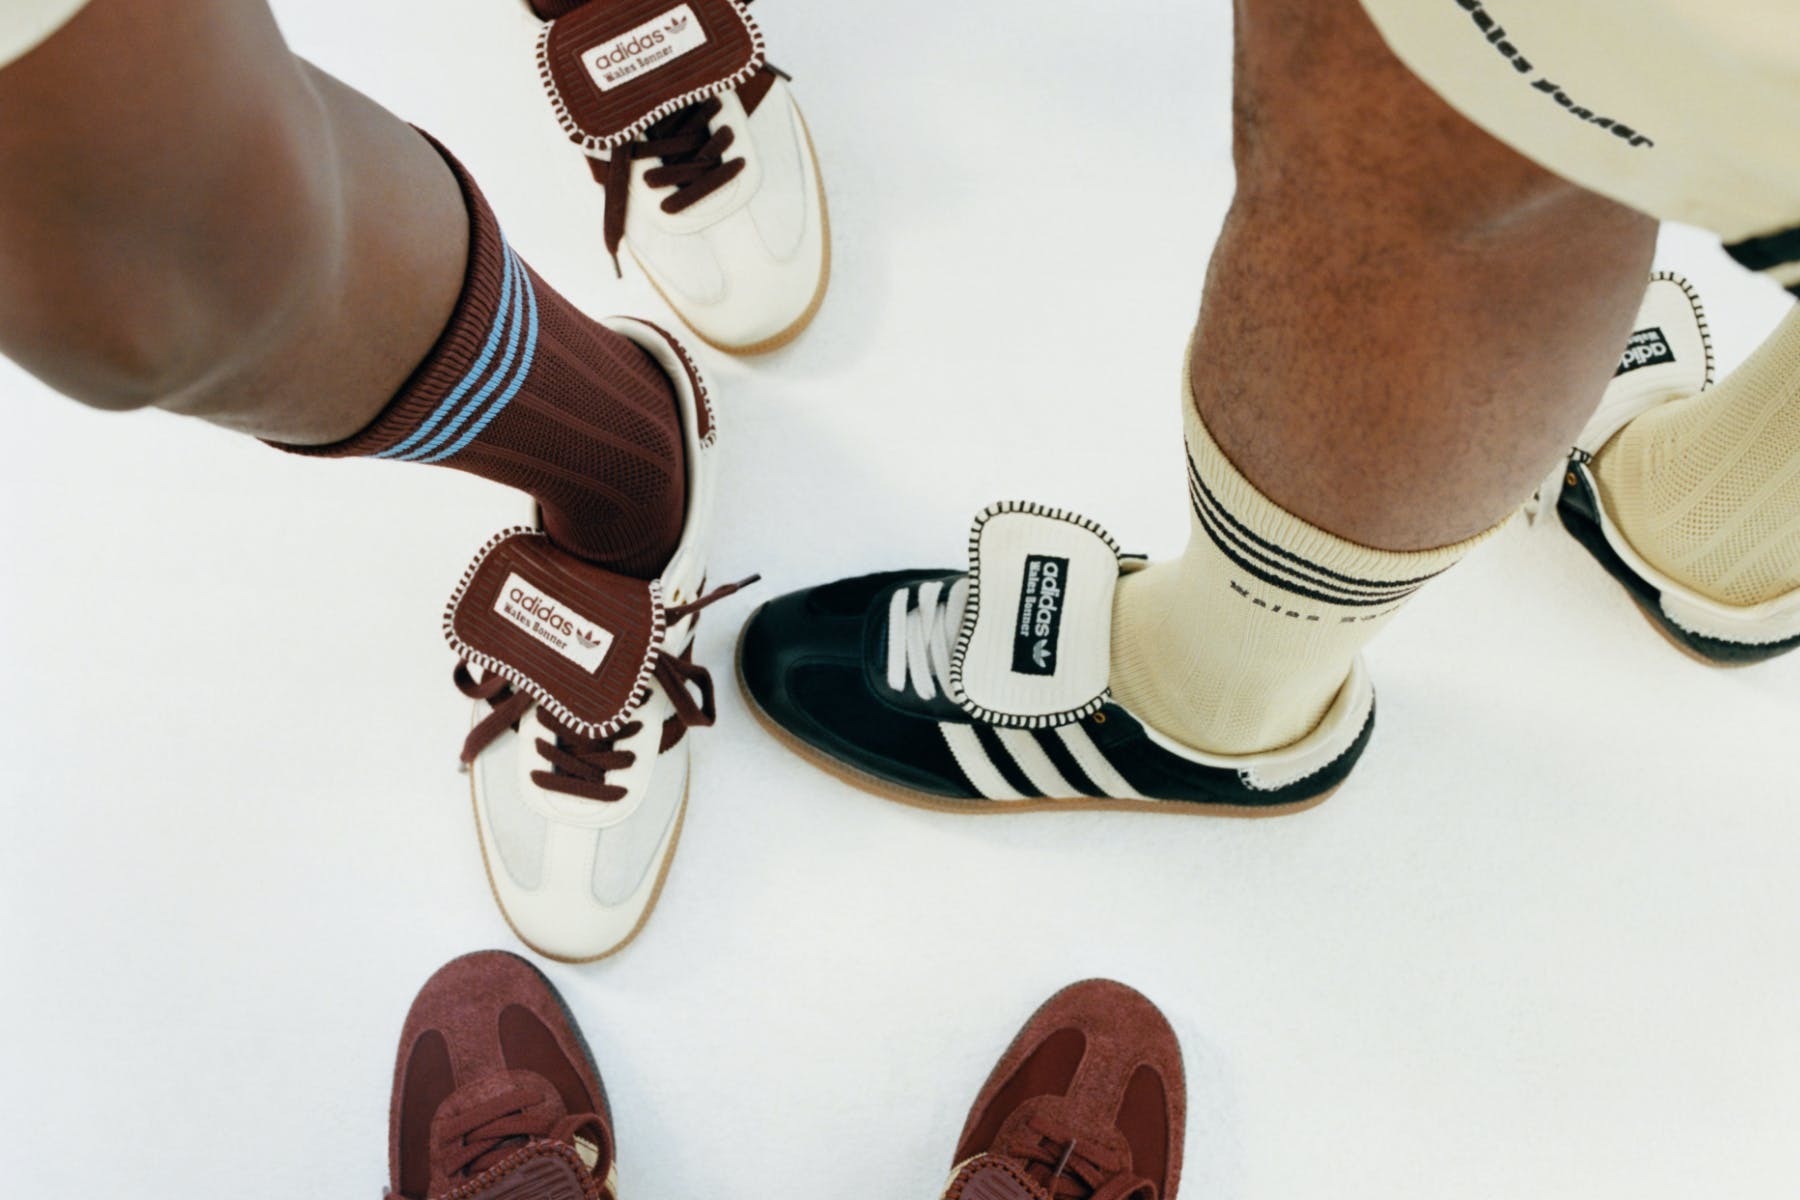 adidas: Everything You Need to Know About the Brand